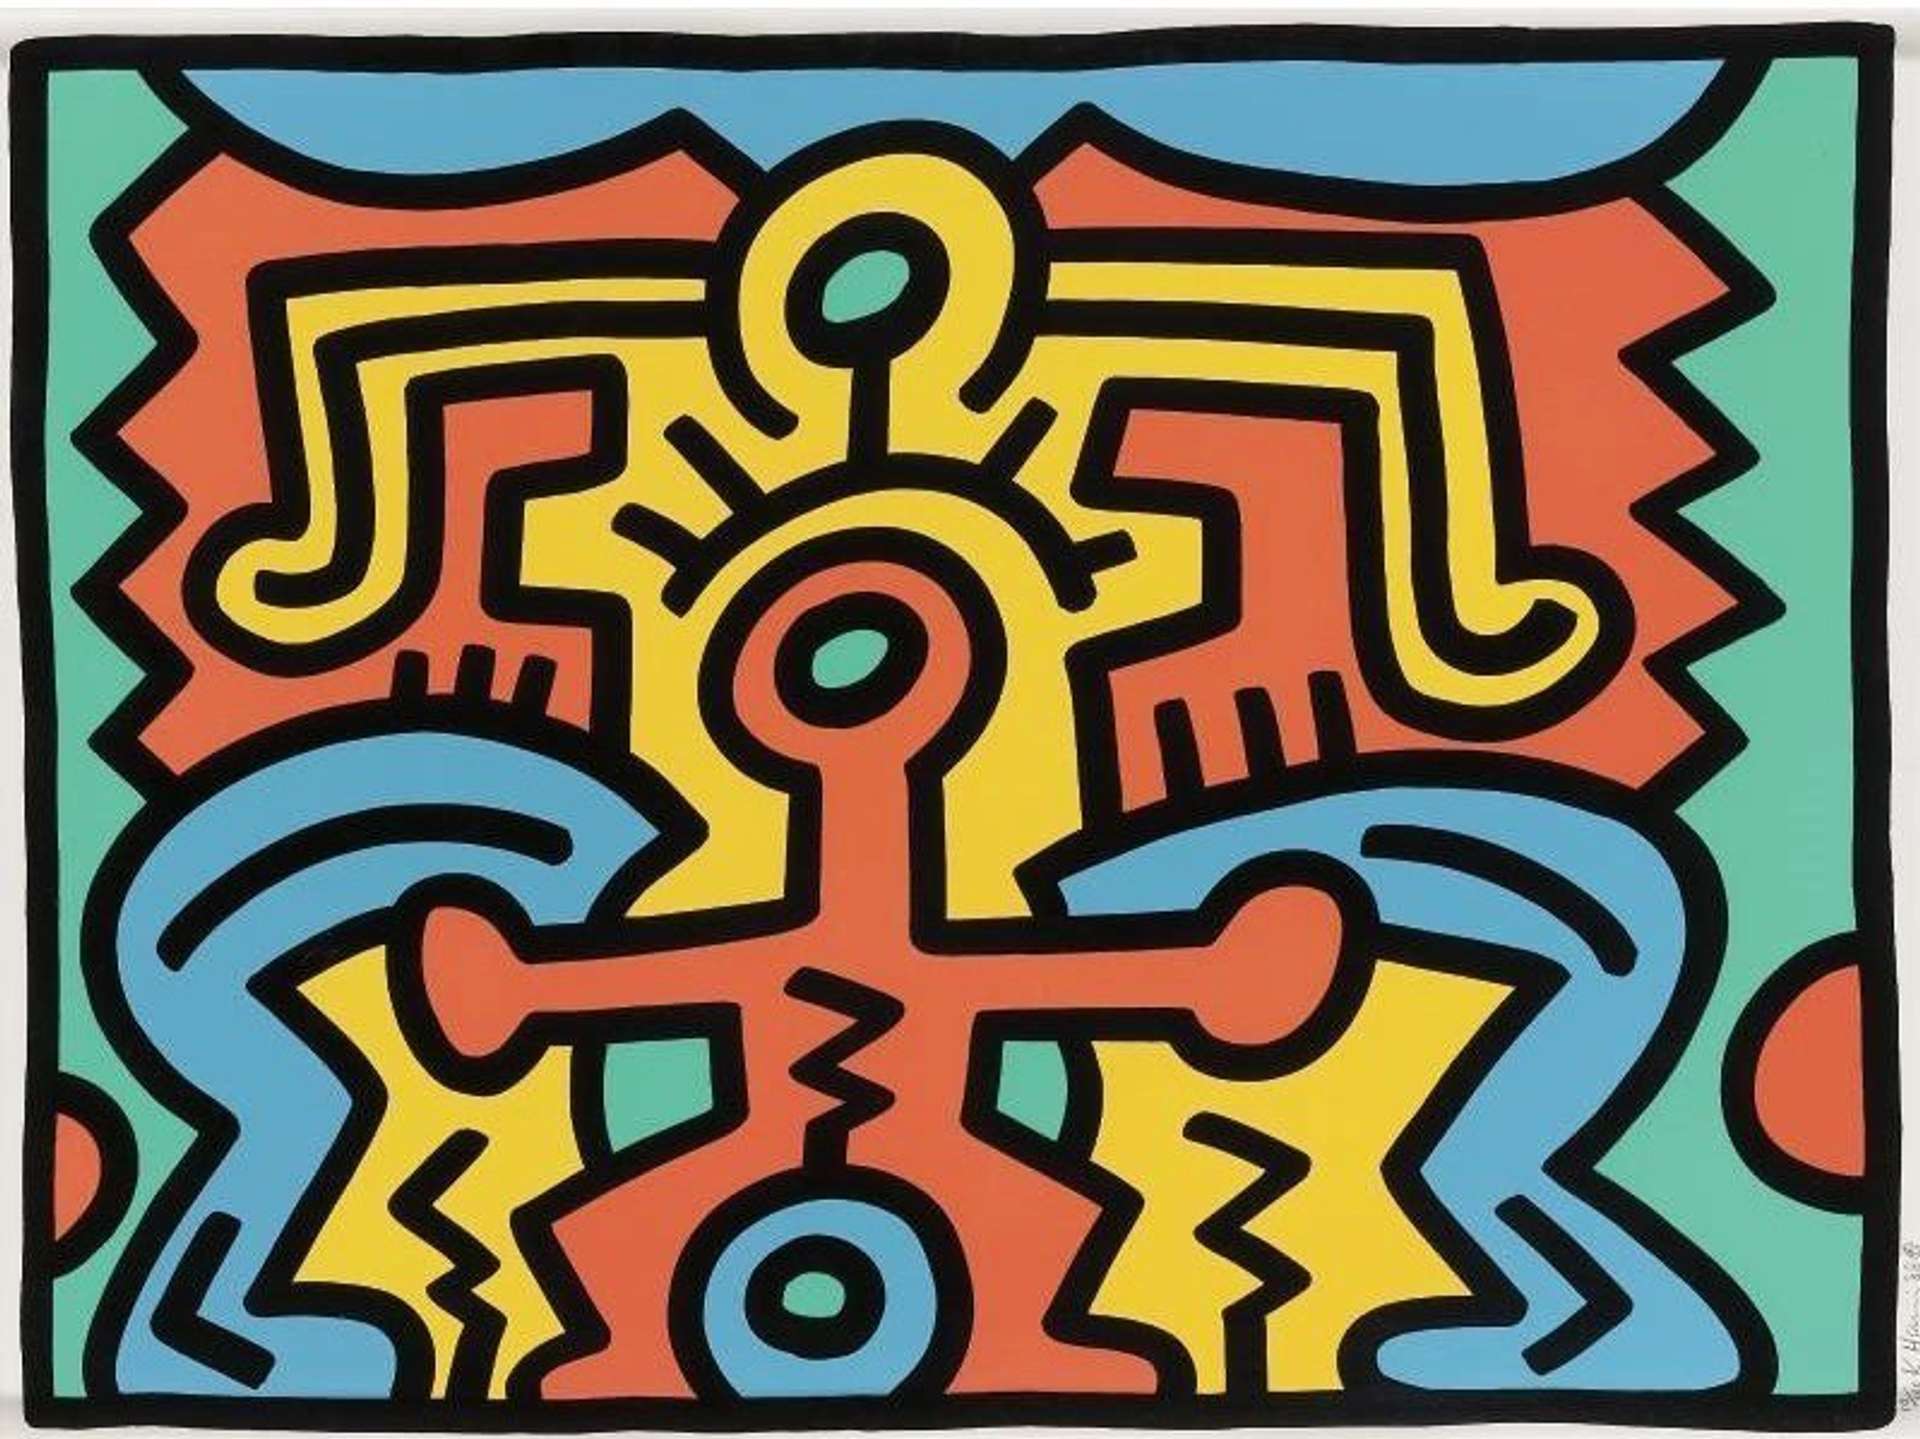 Growing 5 by Keith Haring